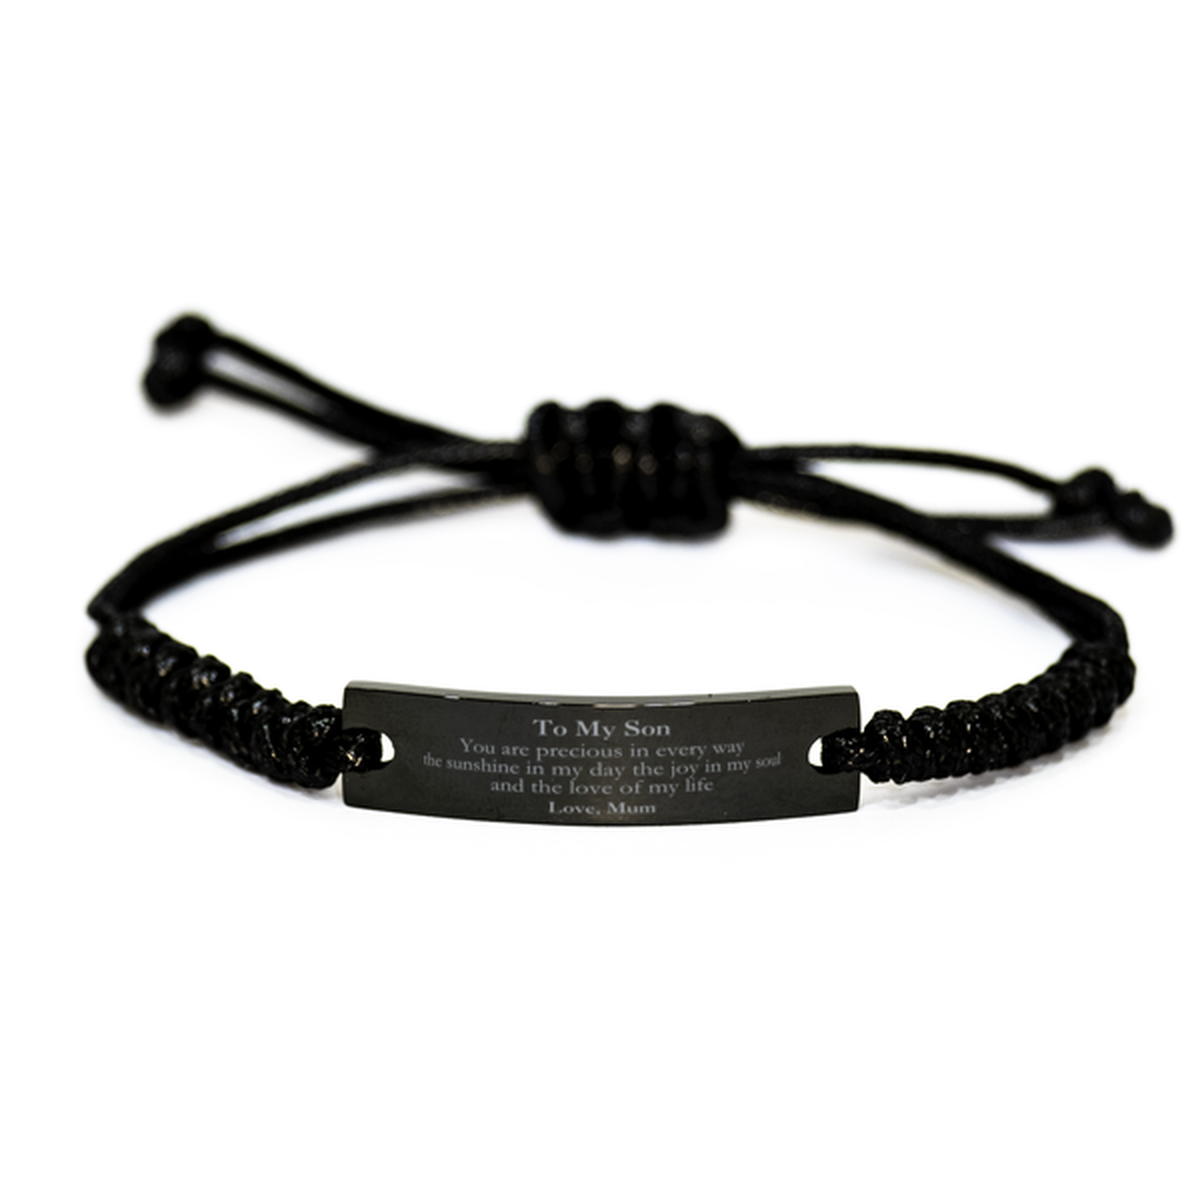 Graduation Gifts for Son Black Rope Bracelet Present from Mum, Christmas Son Birthday Gifts Son You are precious in every way the sunshine in my day. Love, Mum